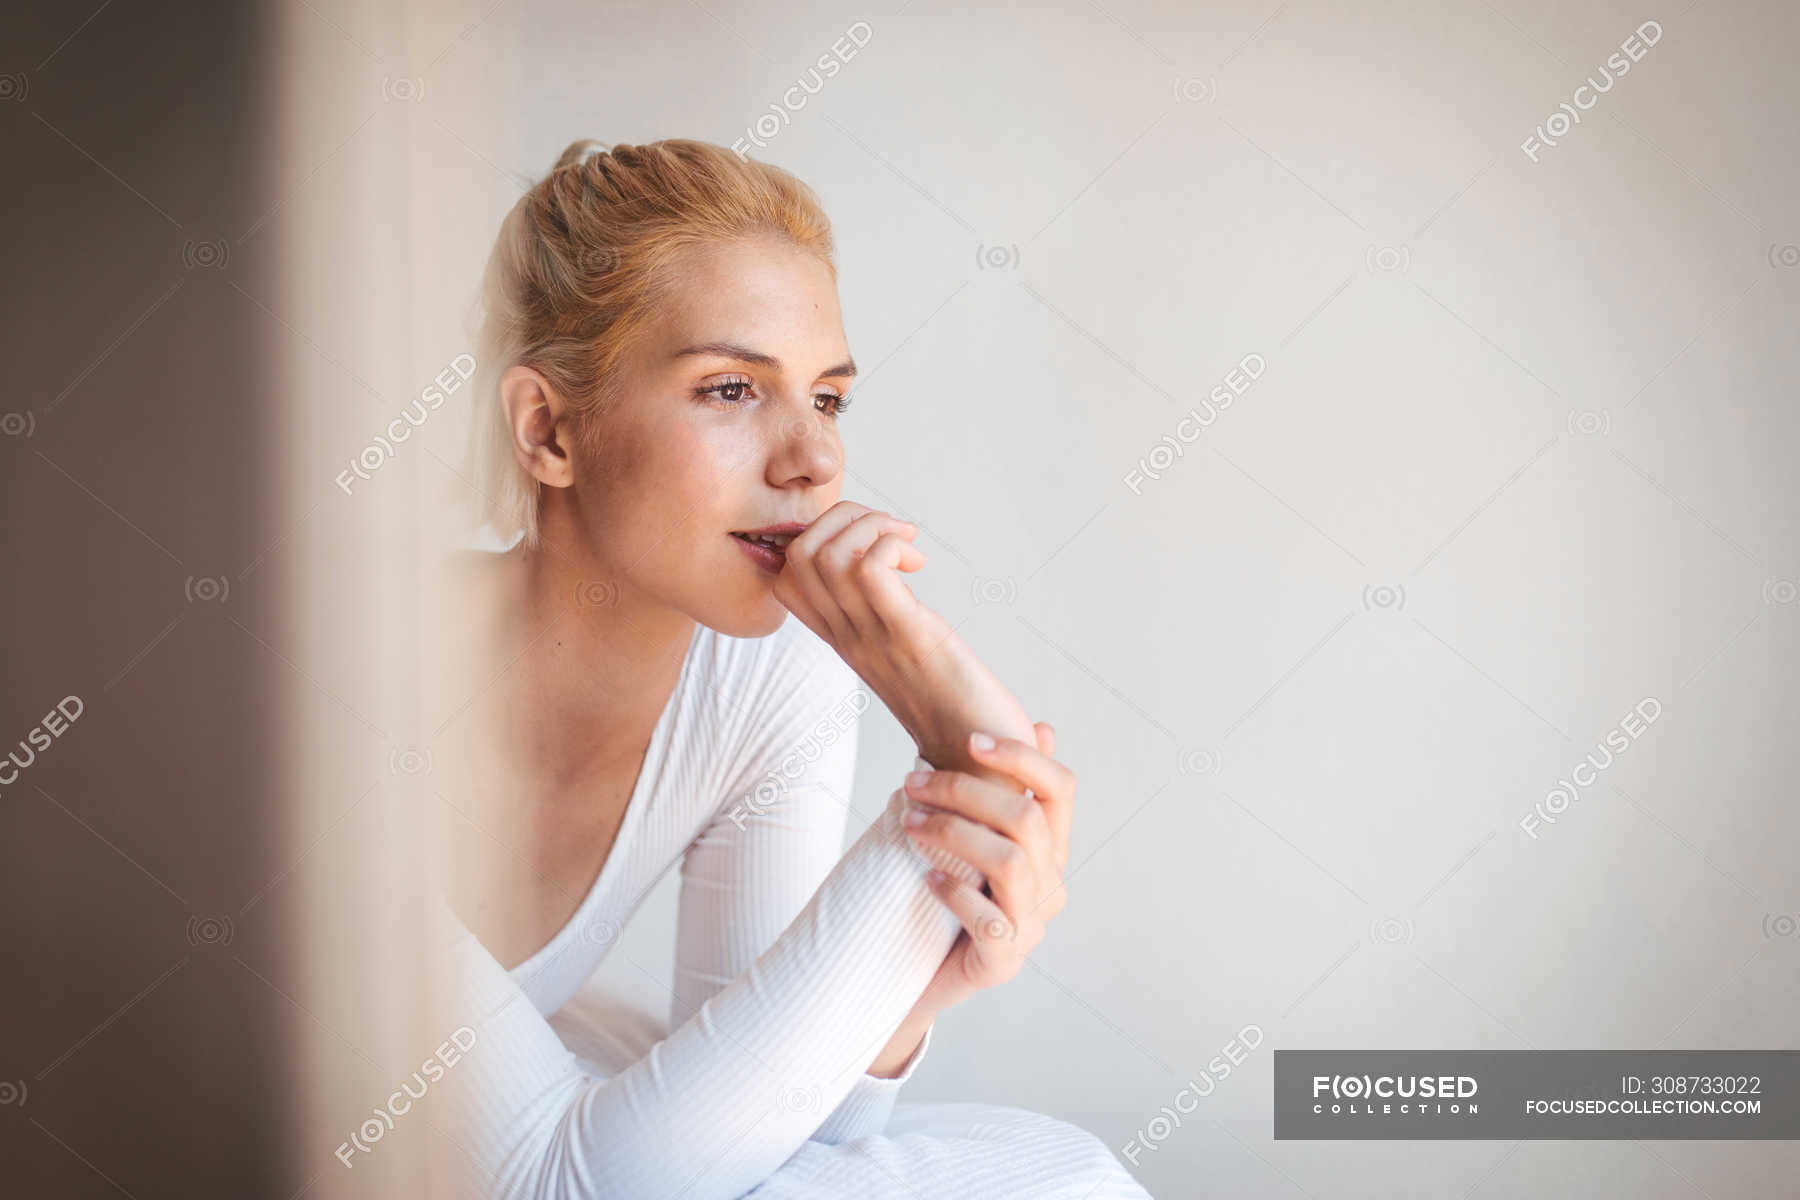 Young Woman With Blond Hair And In Bodysuit Looking Away While Sitting On Soft Bed Against White